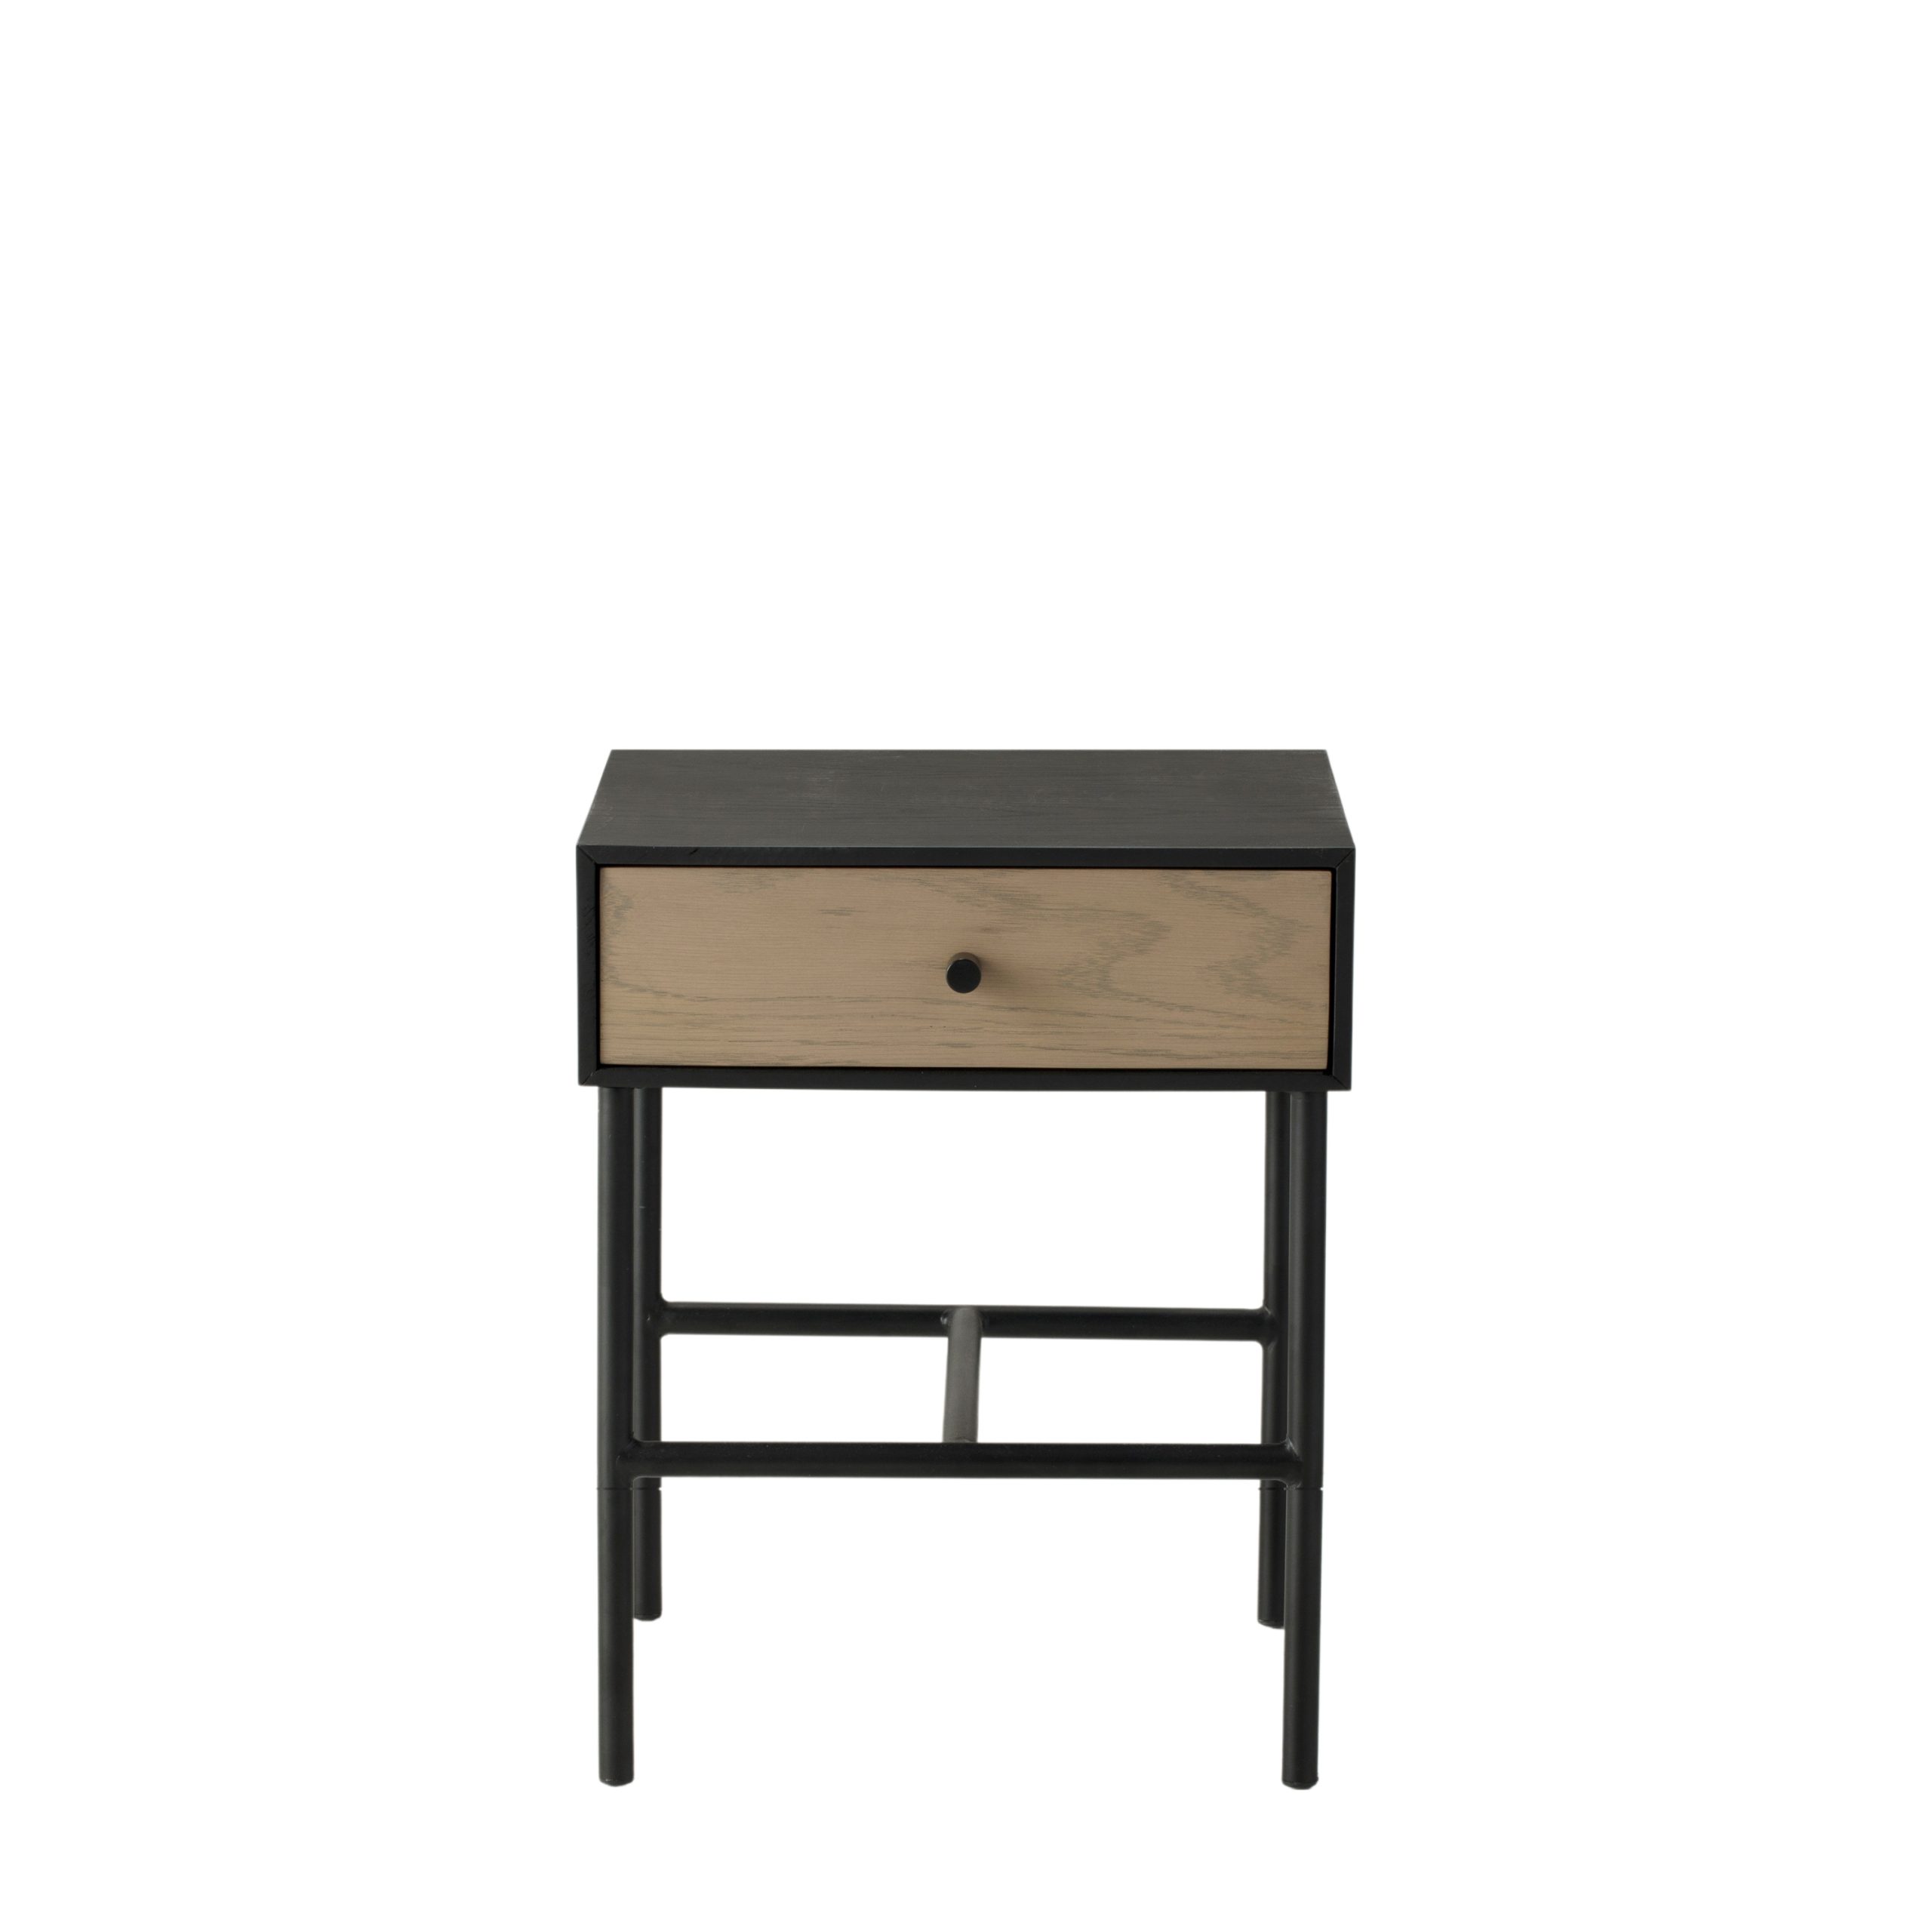 Gallery Direct Carbury 1 Drawer Bedside Table